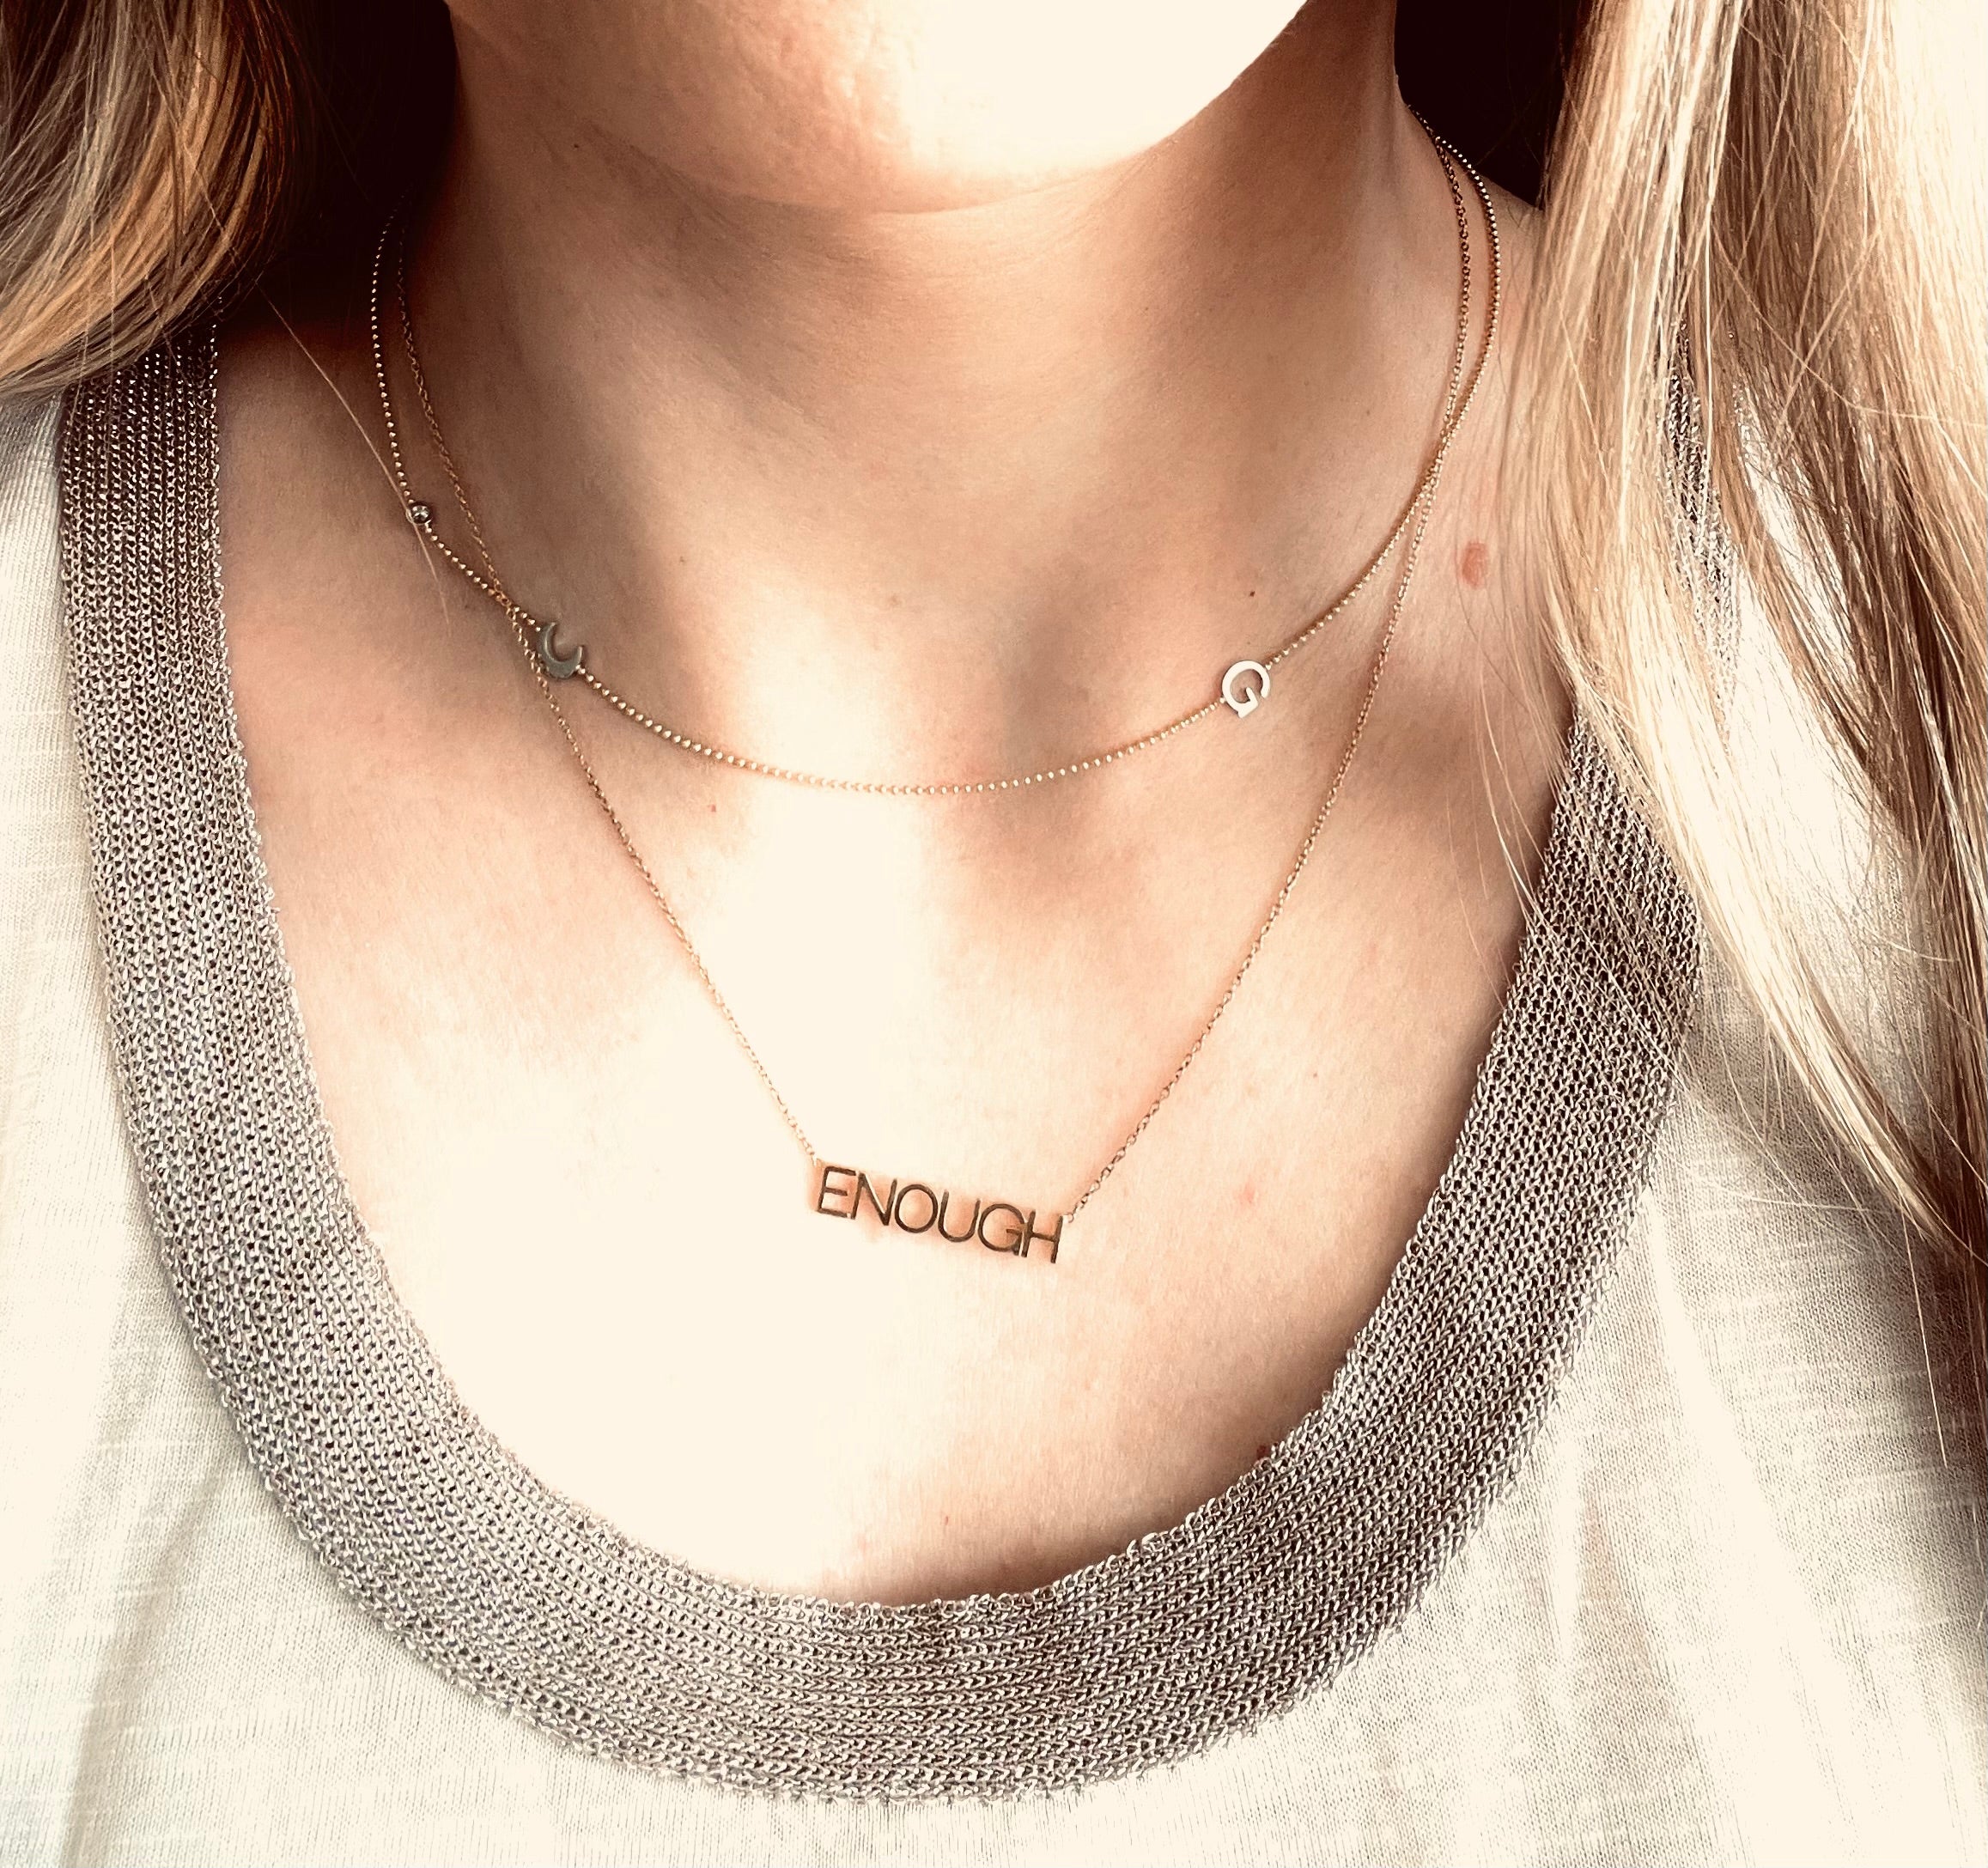 Anchors of Identity: Gintare's 3 Letter Necklace